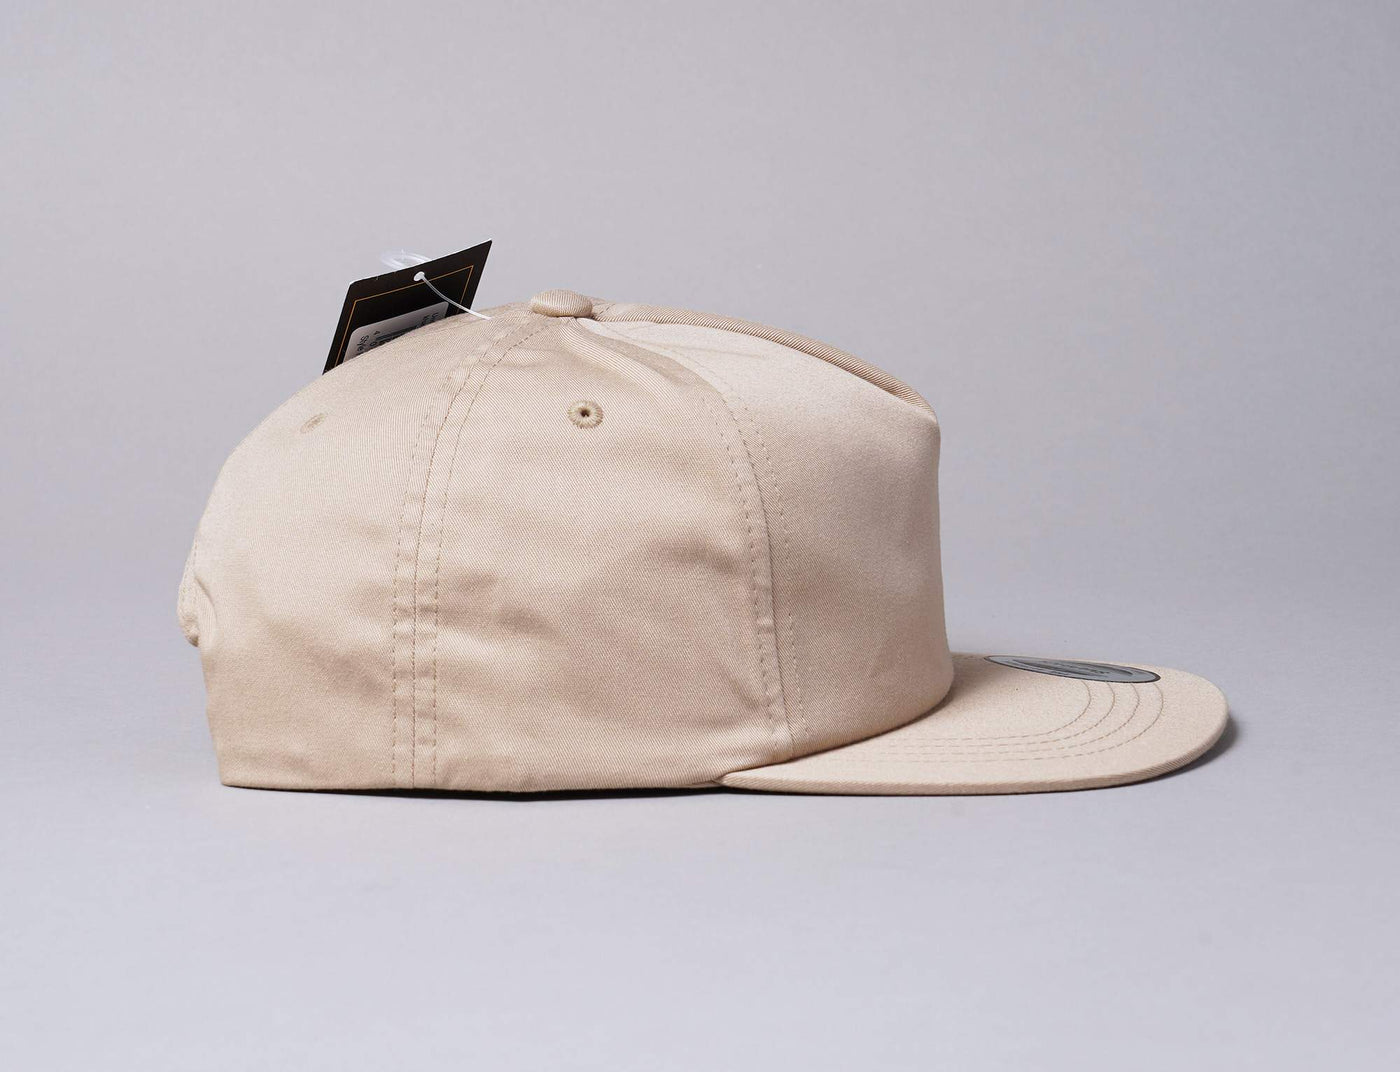 Cap Snapback Yupoong 6502 Unstructured 5-Panel Snapback Cap Khaki Yupoong Snapback Cap / Beige / One Size